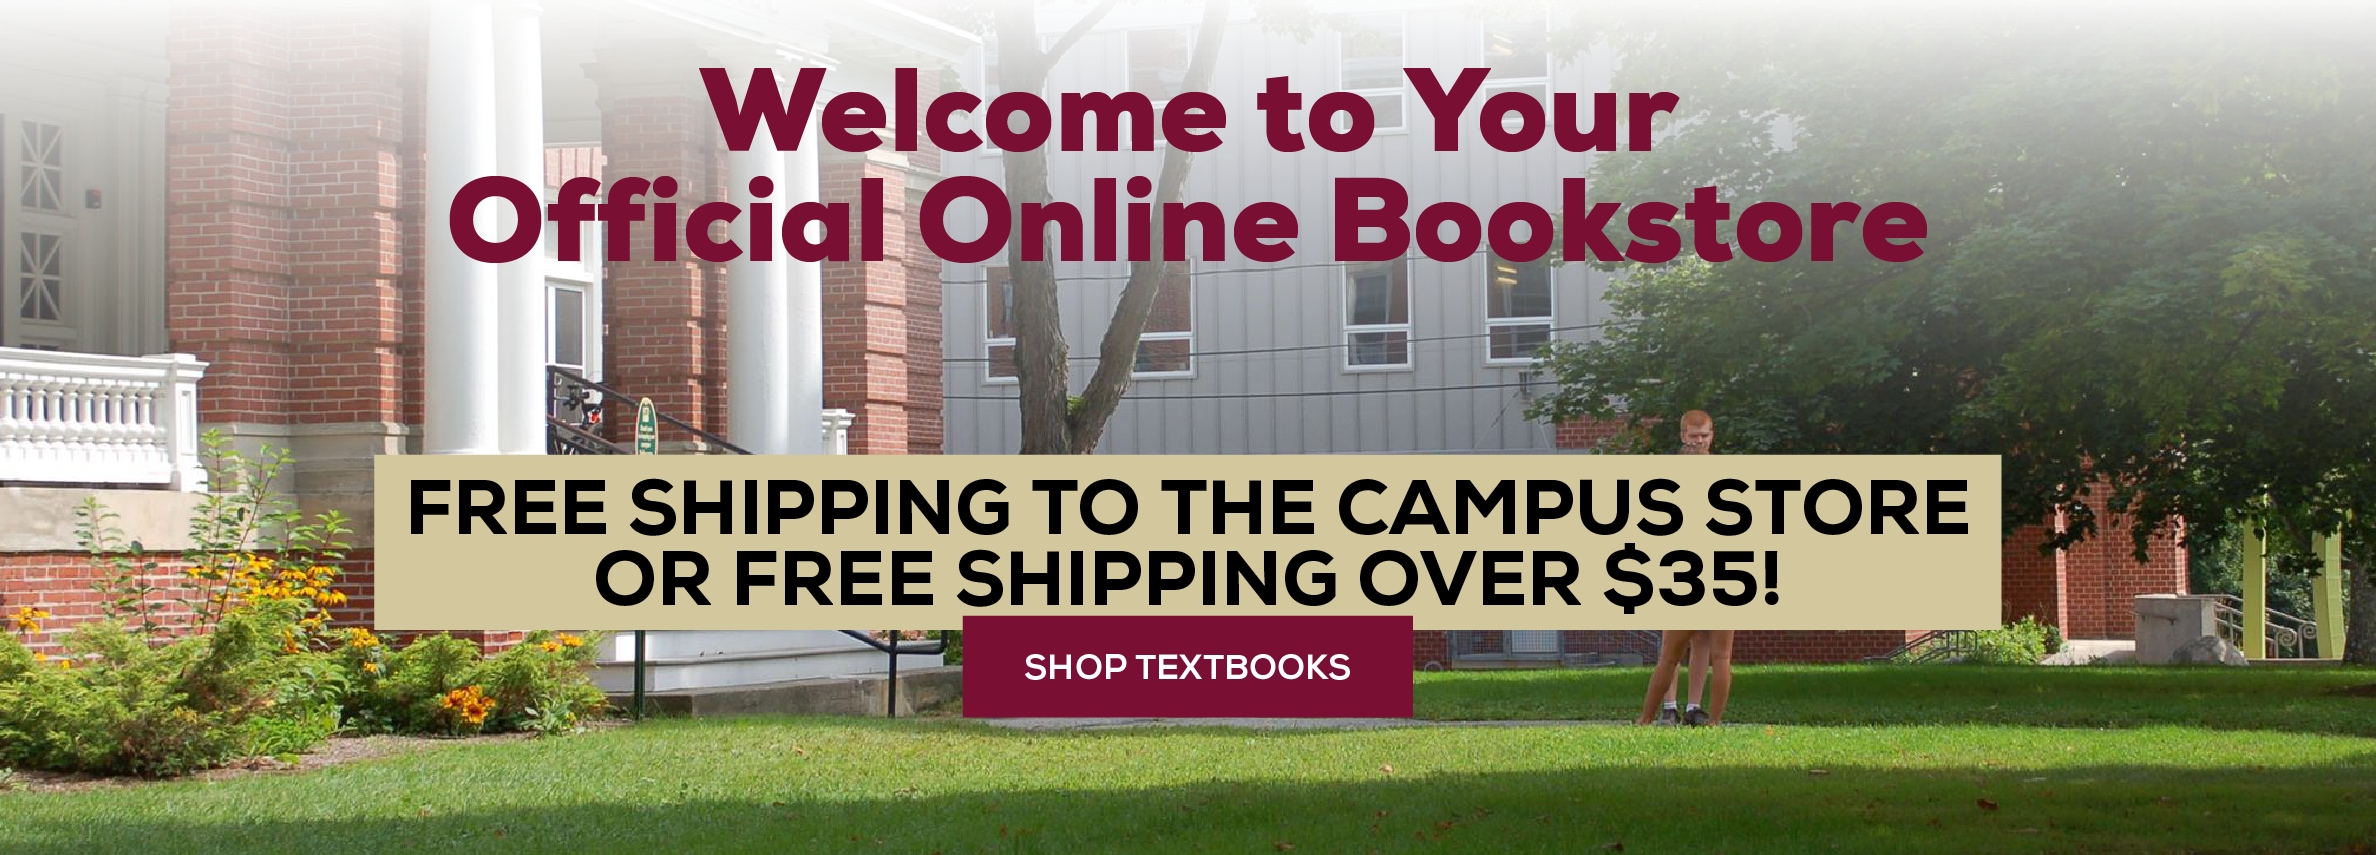 Welcome to your official online bookstore! free shipping to the campus store or free shipping over $35! Shop textbooks (new tab)